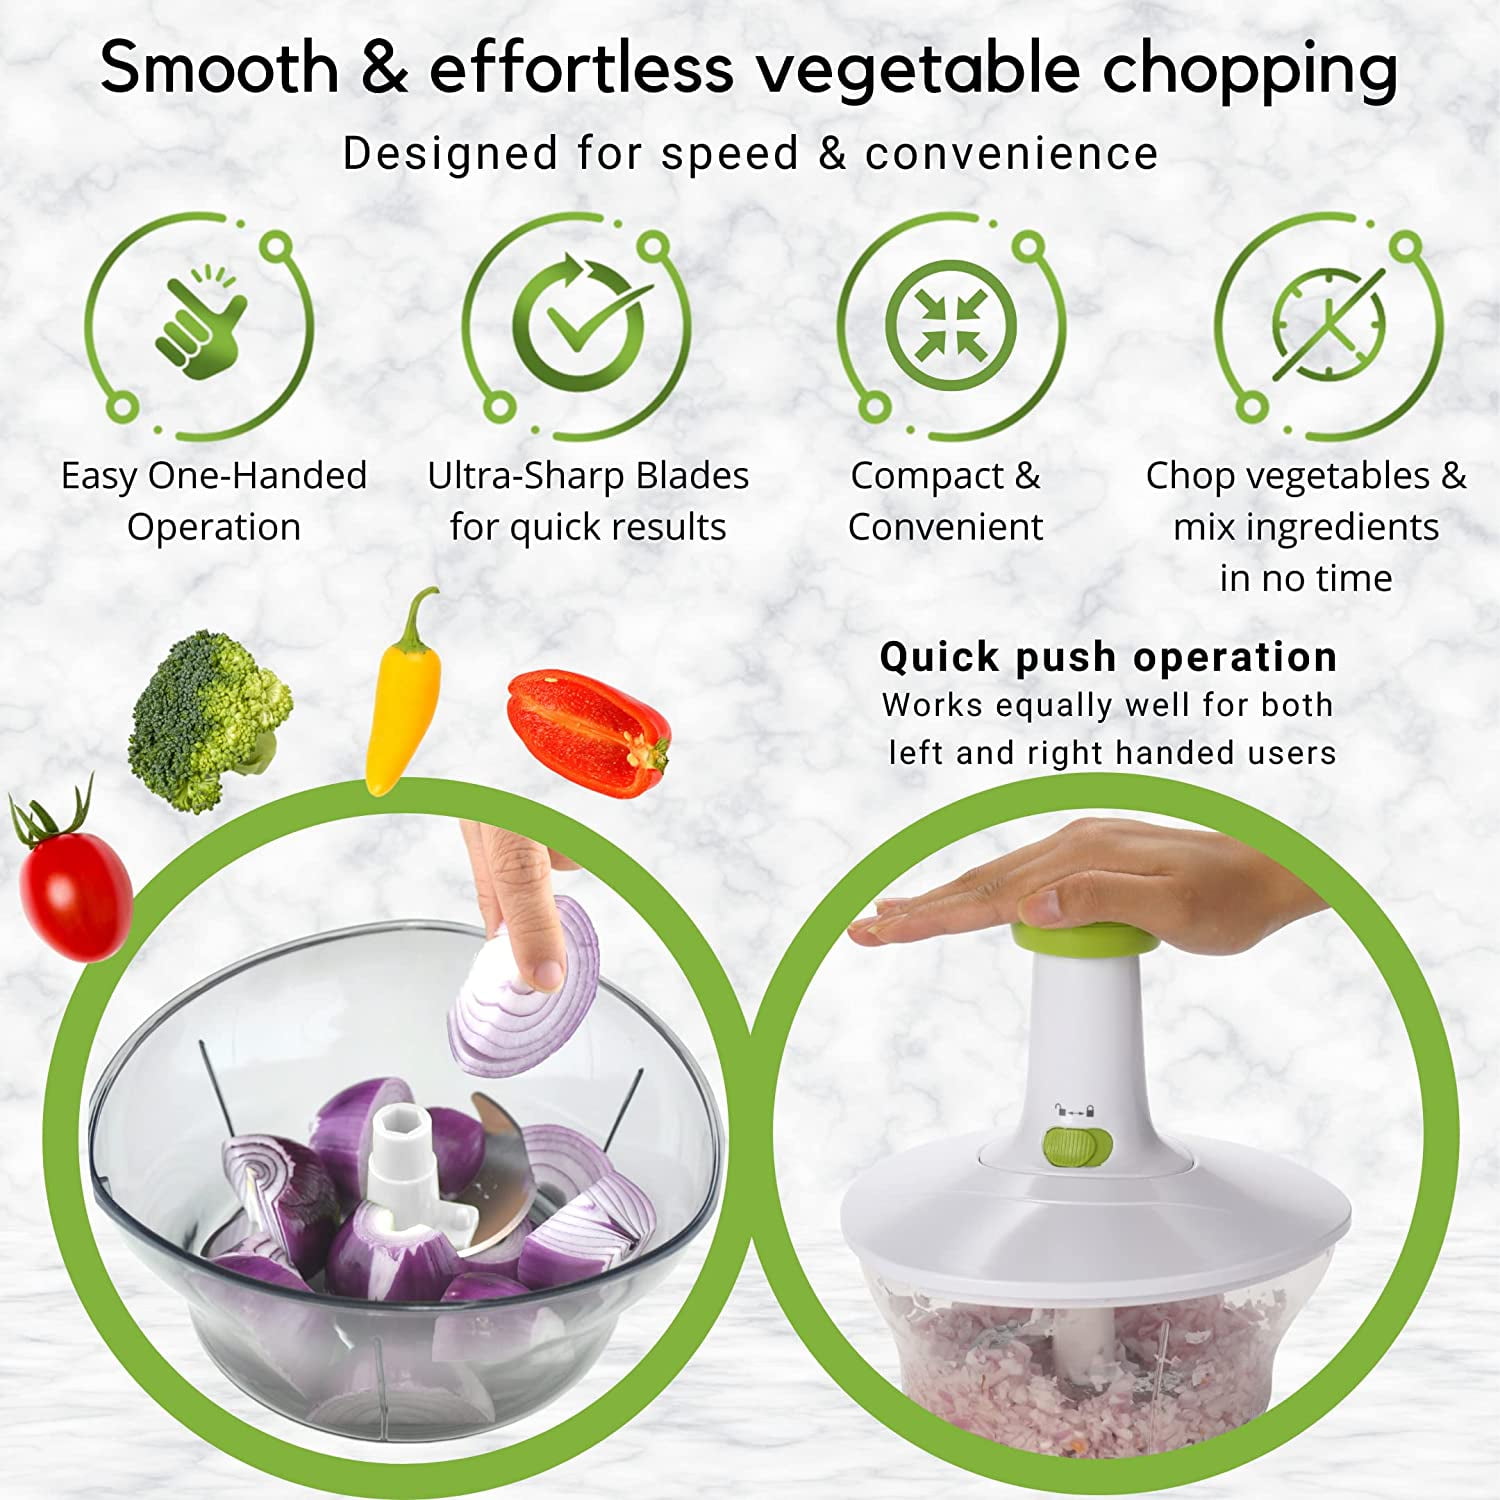 Brieftons Express Manual Food Chopper: 6.8-Cup, Hand Chopper Vegetable  Cutter to Chop Veggies, Fruits, Herbs, Garlic Onion Chopper for Salsa,  Salad, Pesto, Hummus, Guacamole, Coleslaw, Indian Cooking White - 6.8 Cup 